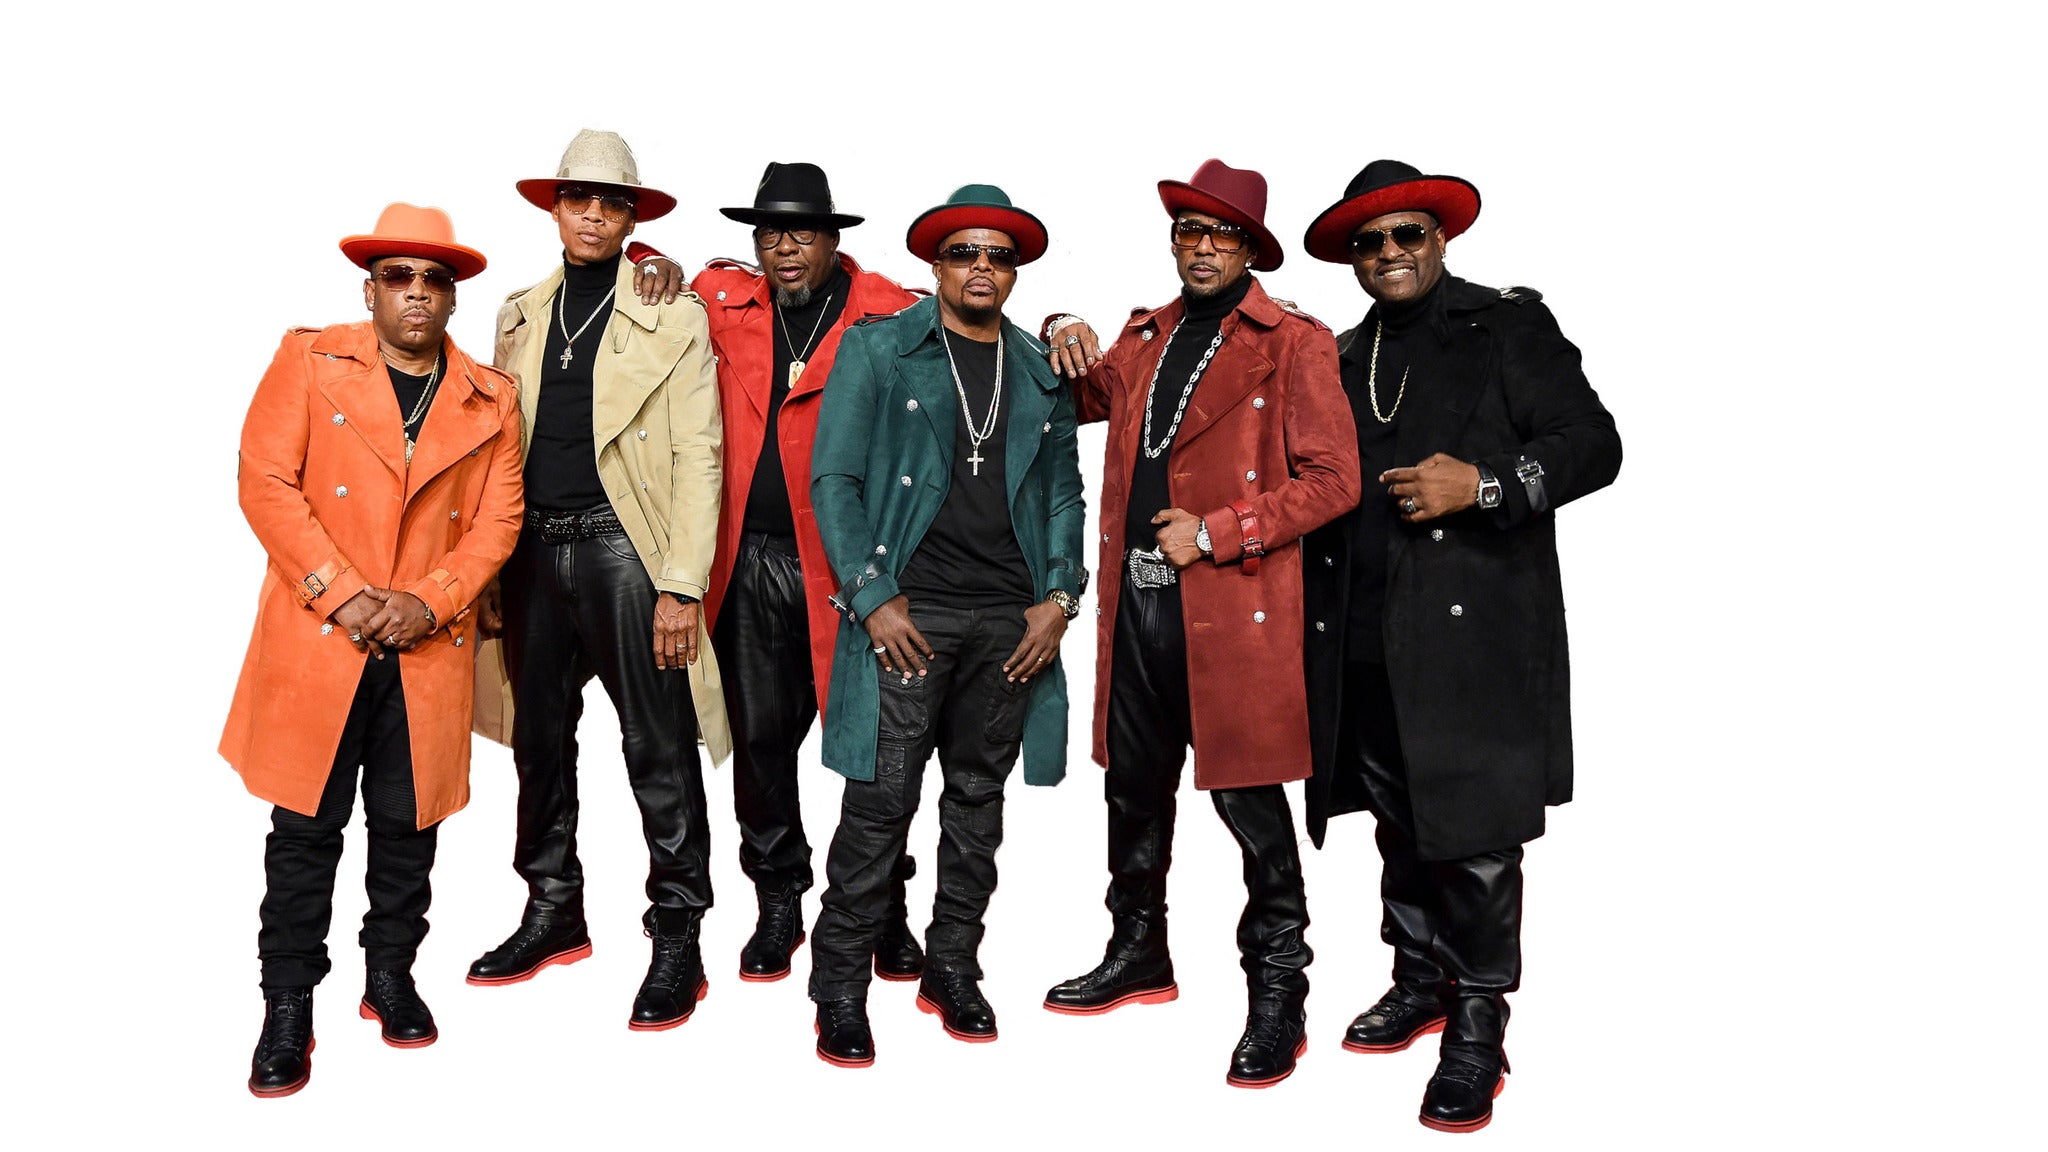 New Edition: The Culture Tour with Charlie Wilson + Jodeci pre-sale code for concert tickets in Atlanta, GA (State Farm Arena)